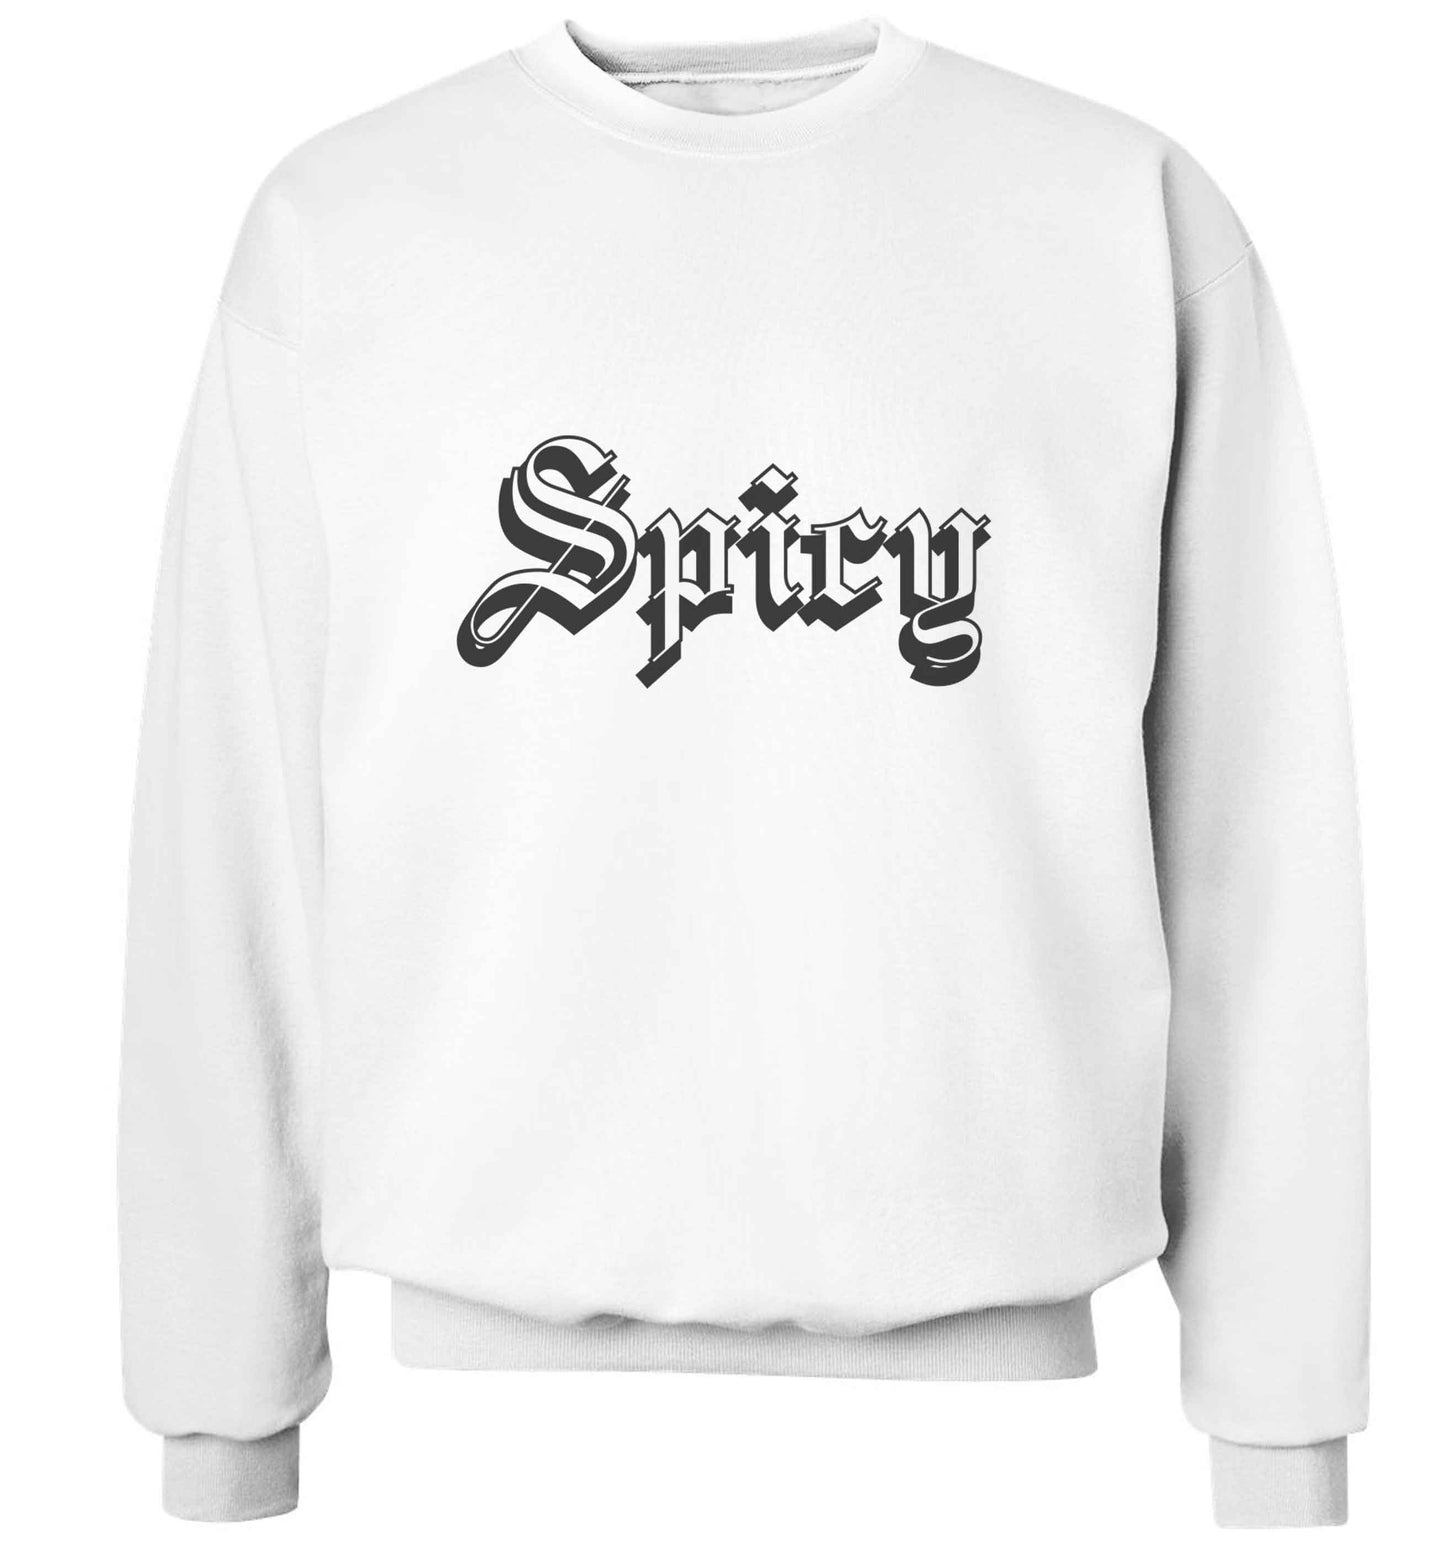 Spicy adult's unisex white sweater 2XL